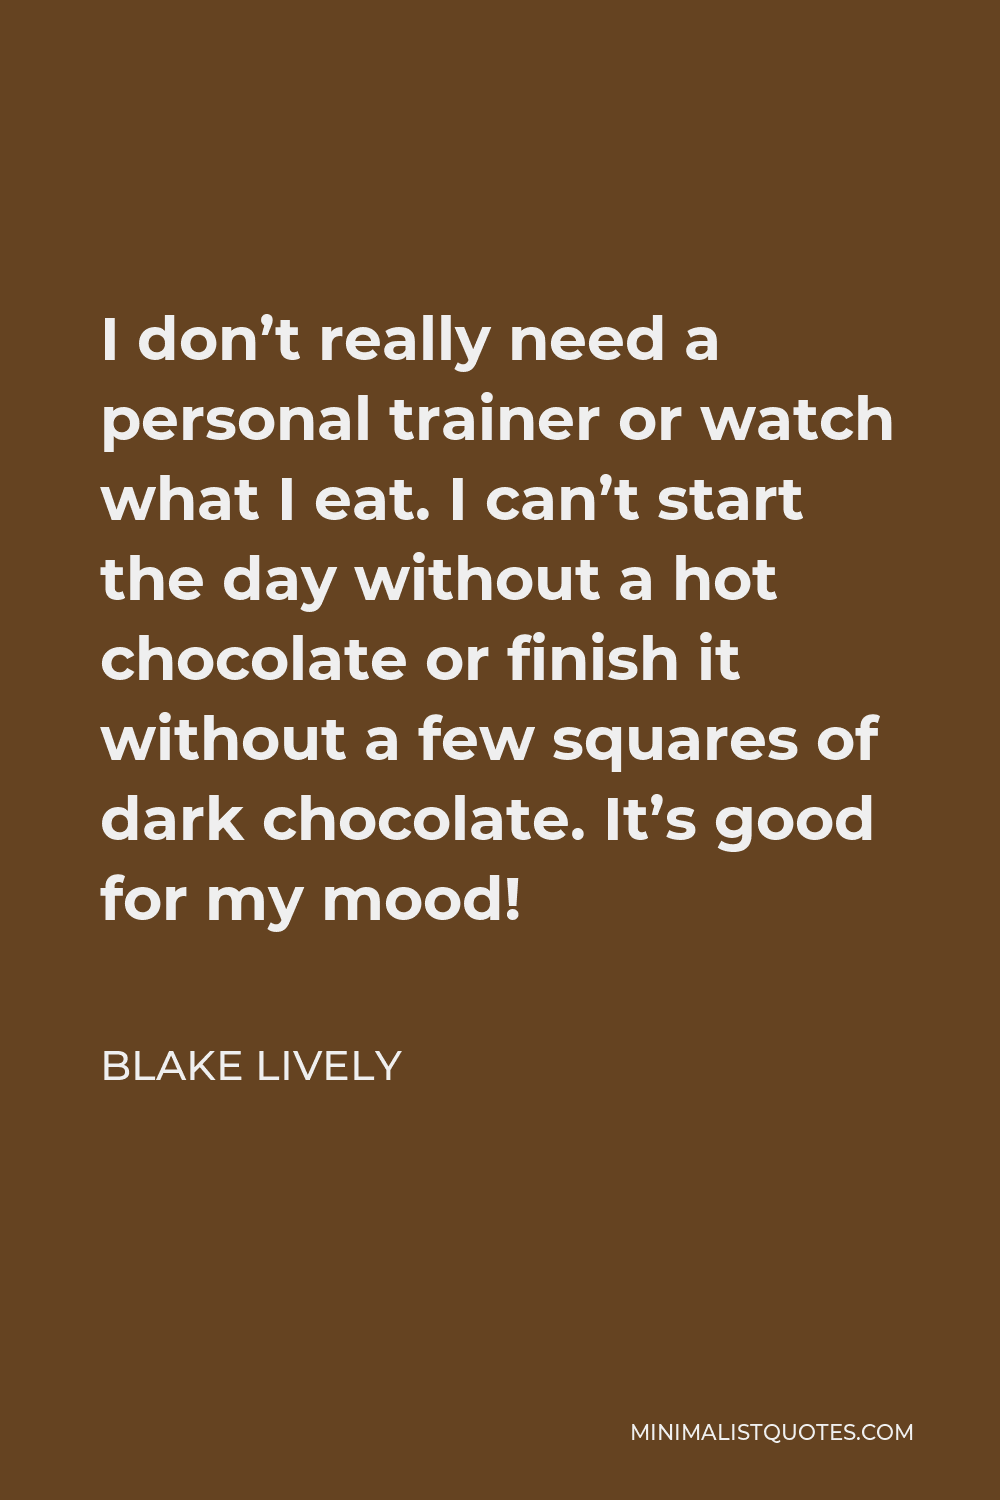 Blake Lively Quote - I don’t really need a personal trainer or watch what I eat. I can’t start the day without a hot chocolate or finish it without a few squares of dark chocolate. It’s good for my mood!